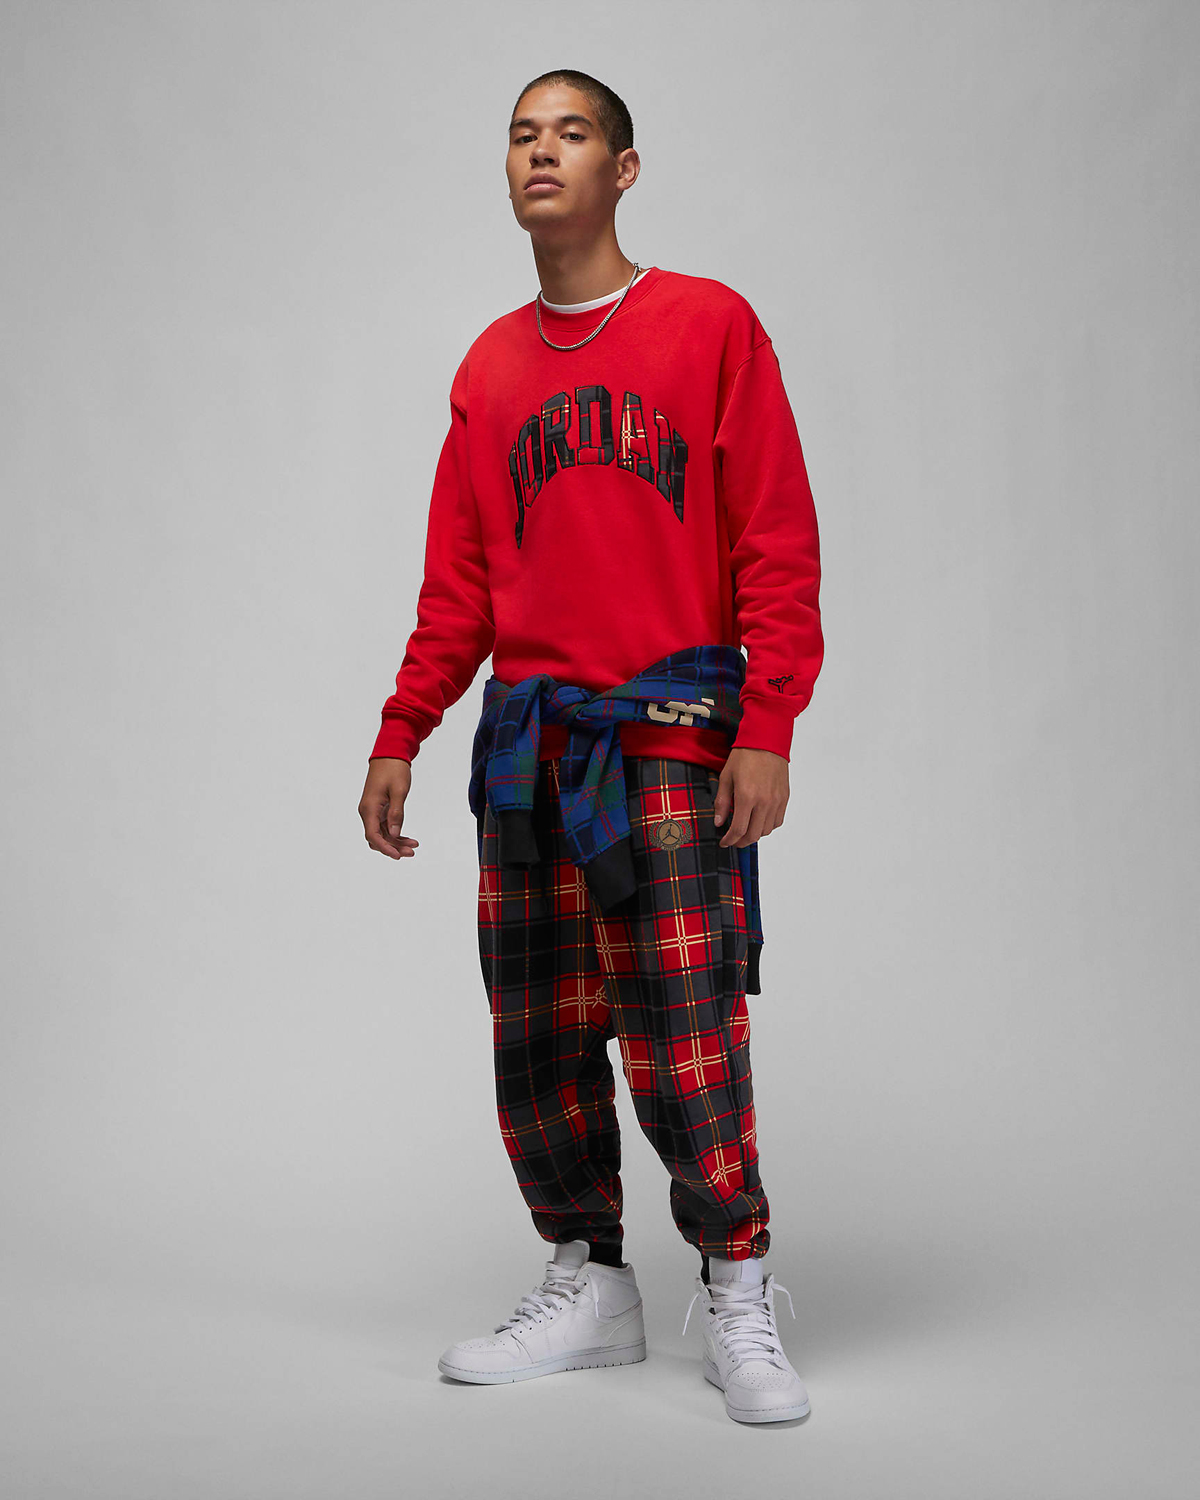 Jordan-Essential-Plaid-Holiday-2022-Crew-Sweatshirt-Pants-Fire-Red-Outfit